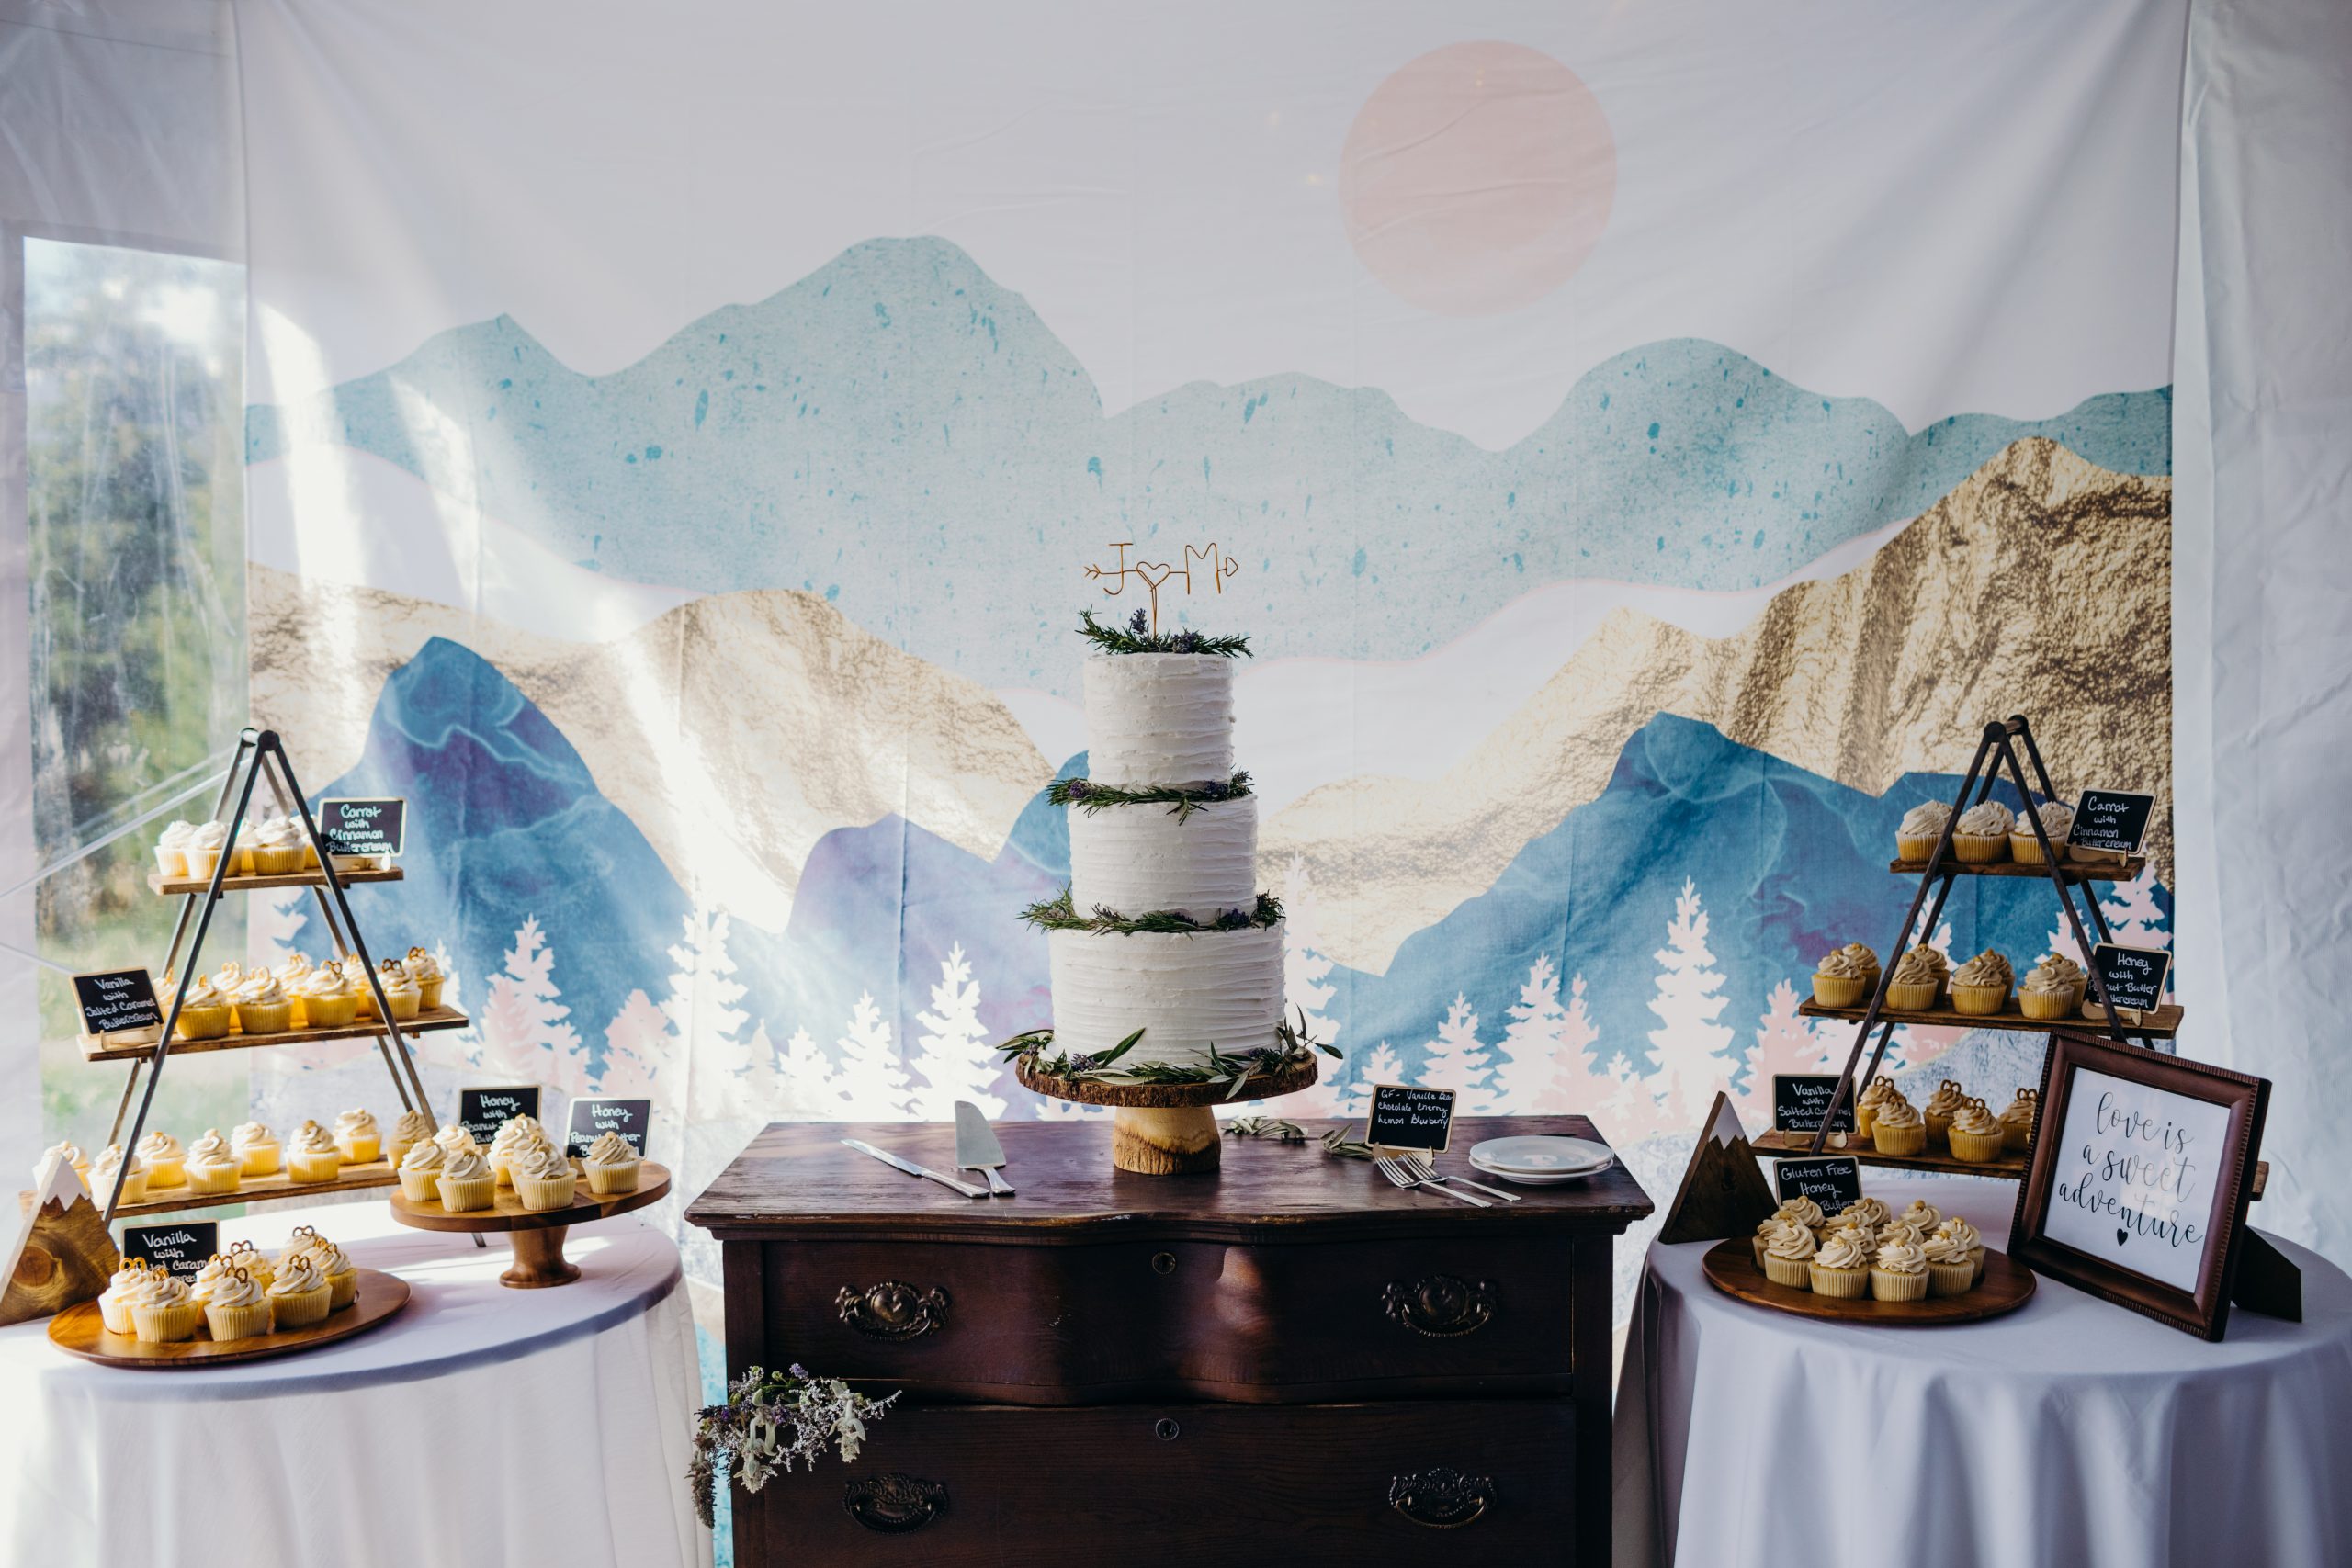 Cake table with mountain backdrop